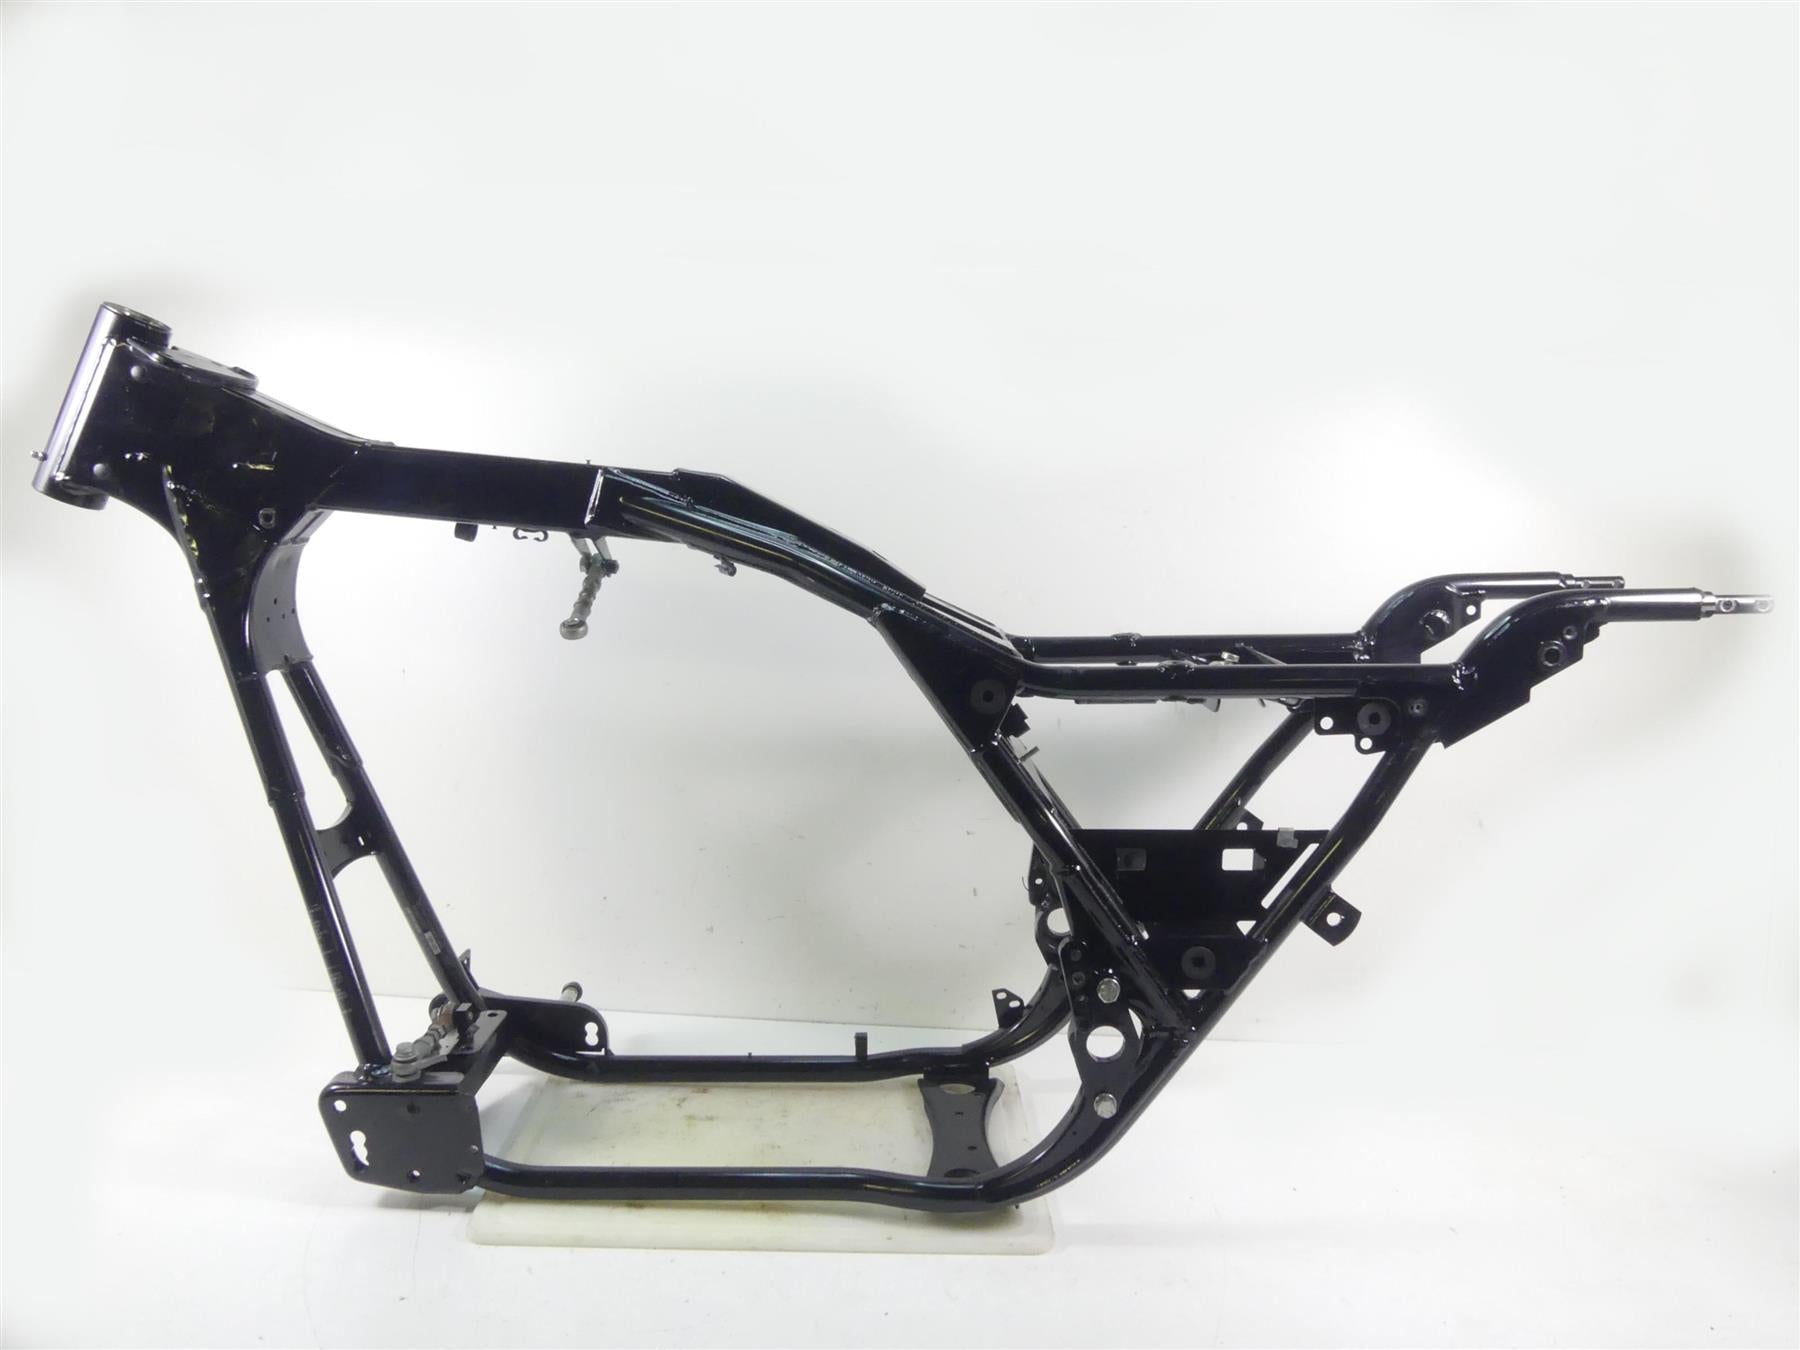 2002 Harley Touring FLHRCI Road King Straight Main Frame Chassis 47900-02 | Mototech271